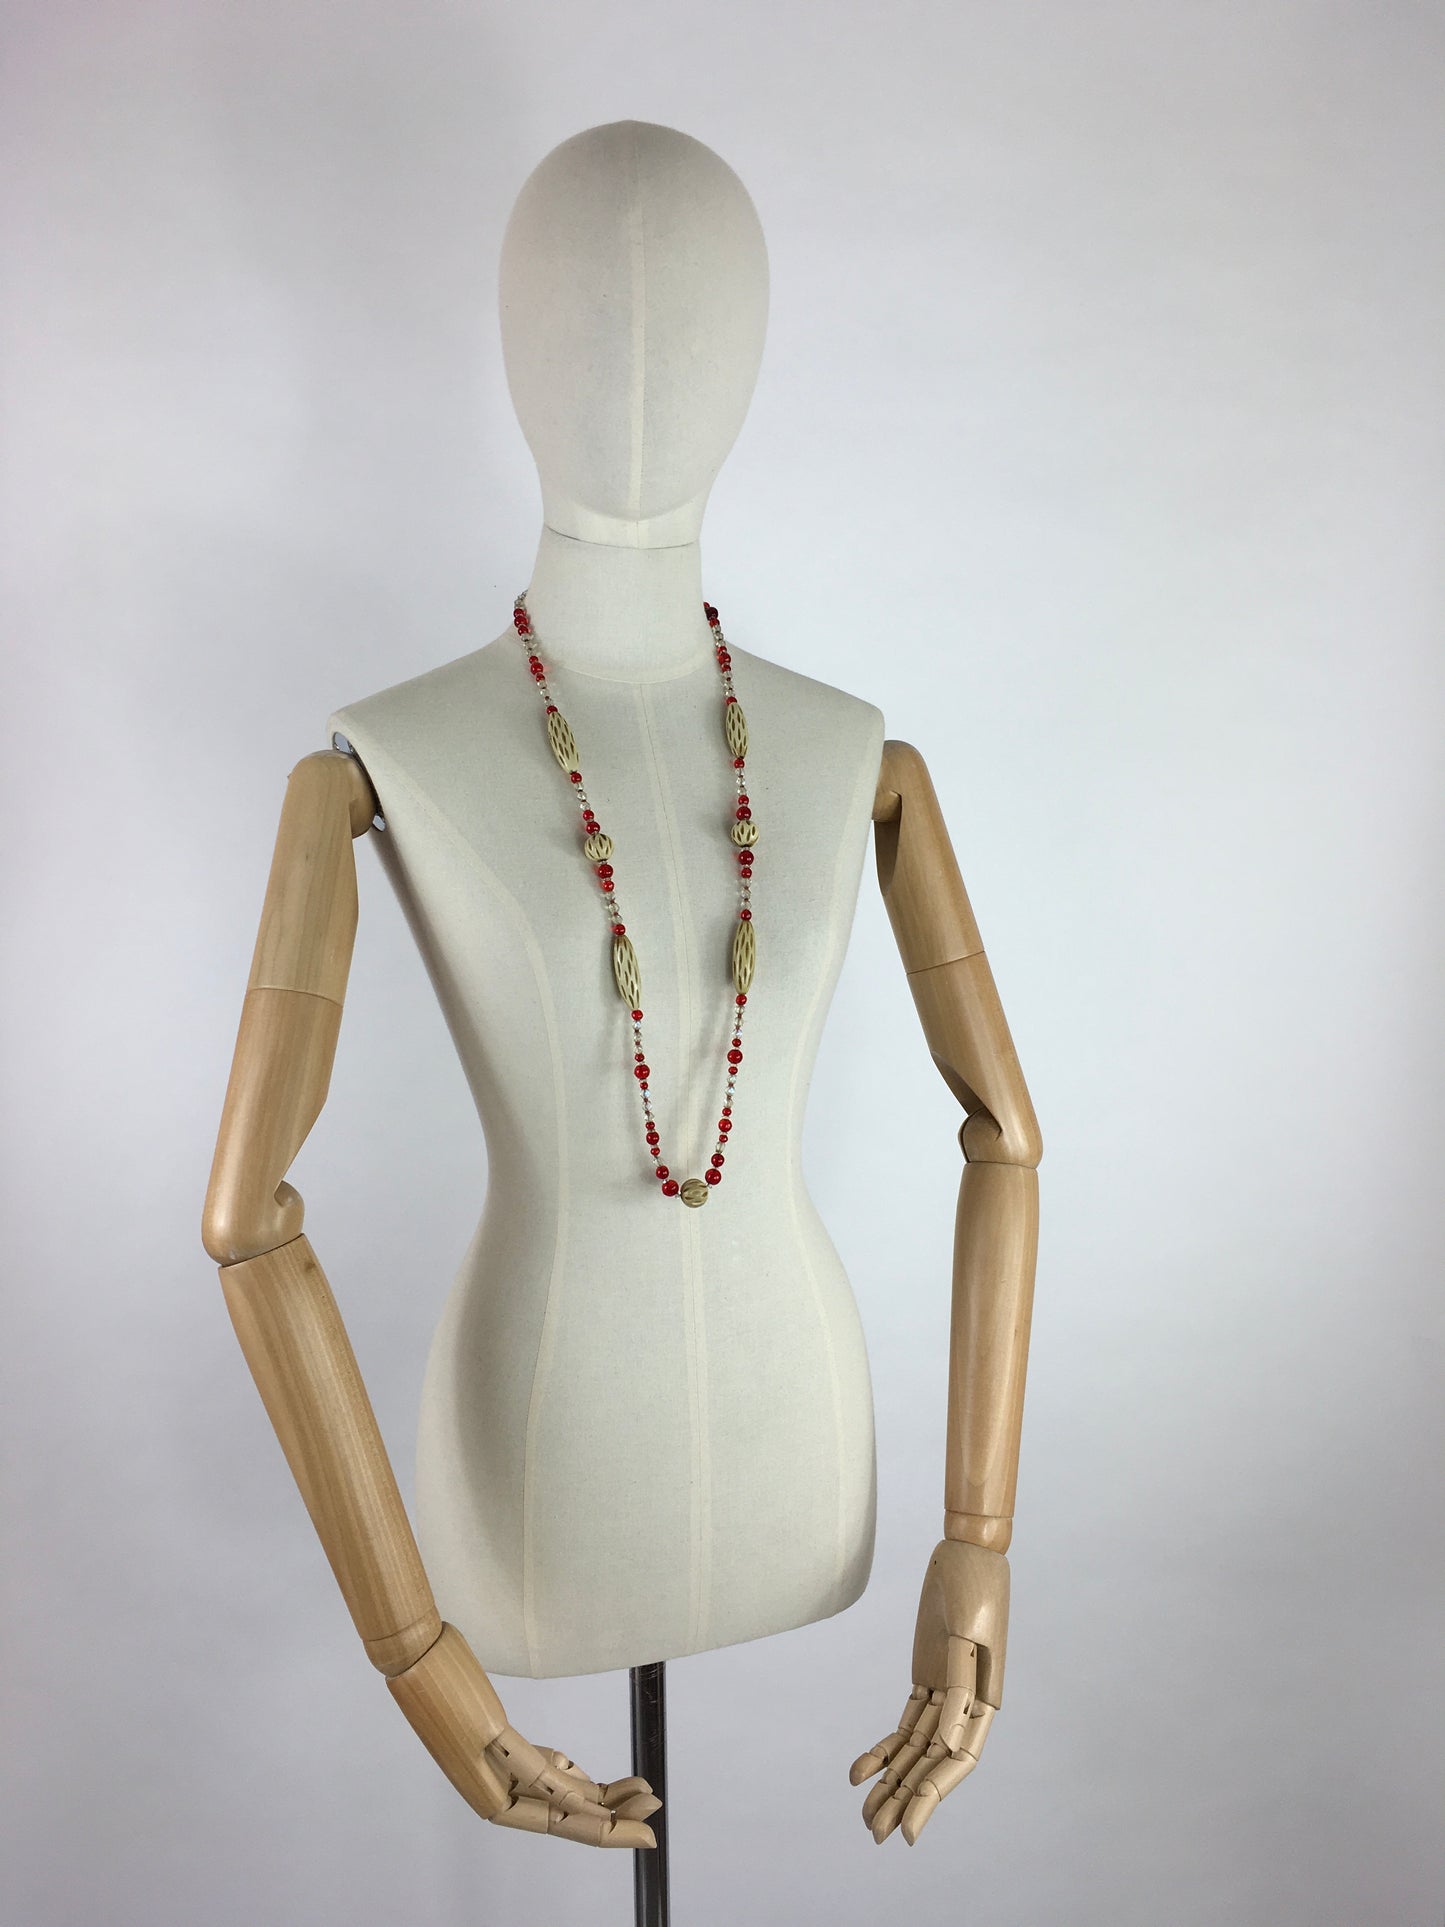 Original 1930s Long Line Necklace - In a Contrast Glass Bead and Celluloid in Reds, Clear and Soft Cream